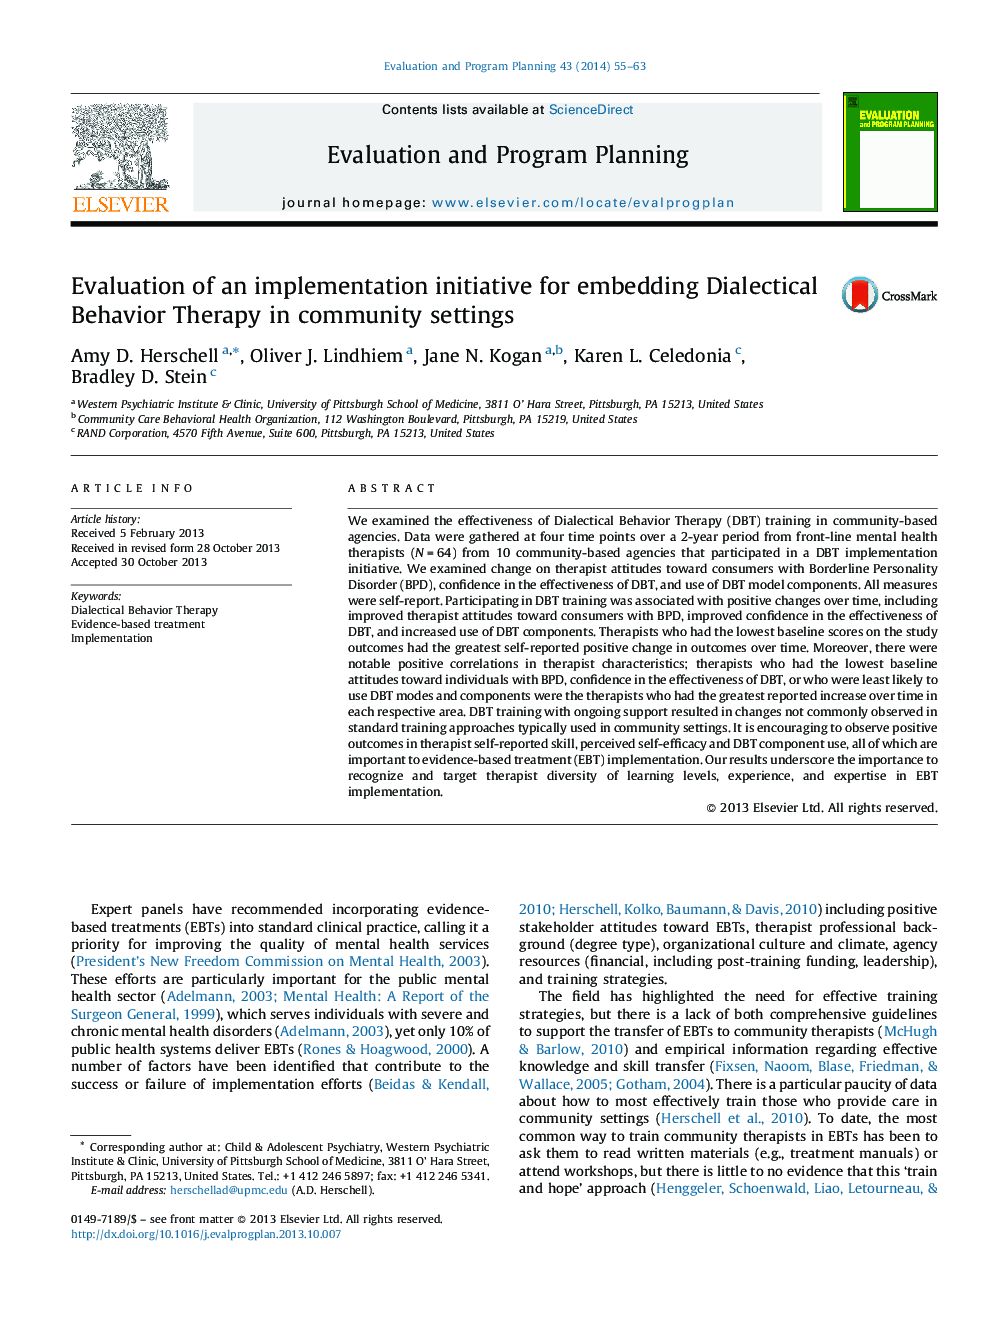 Evaluation of an implementation initiative for embedding Dialectical Behavior Therapy in community settings